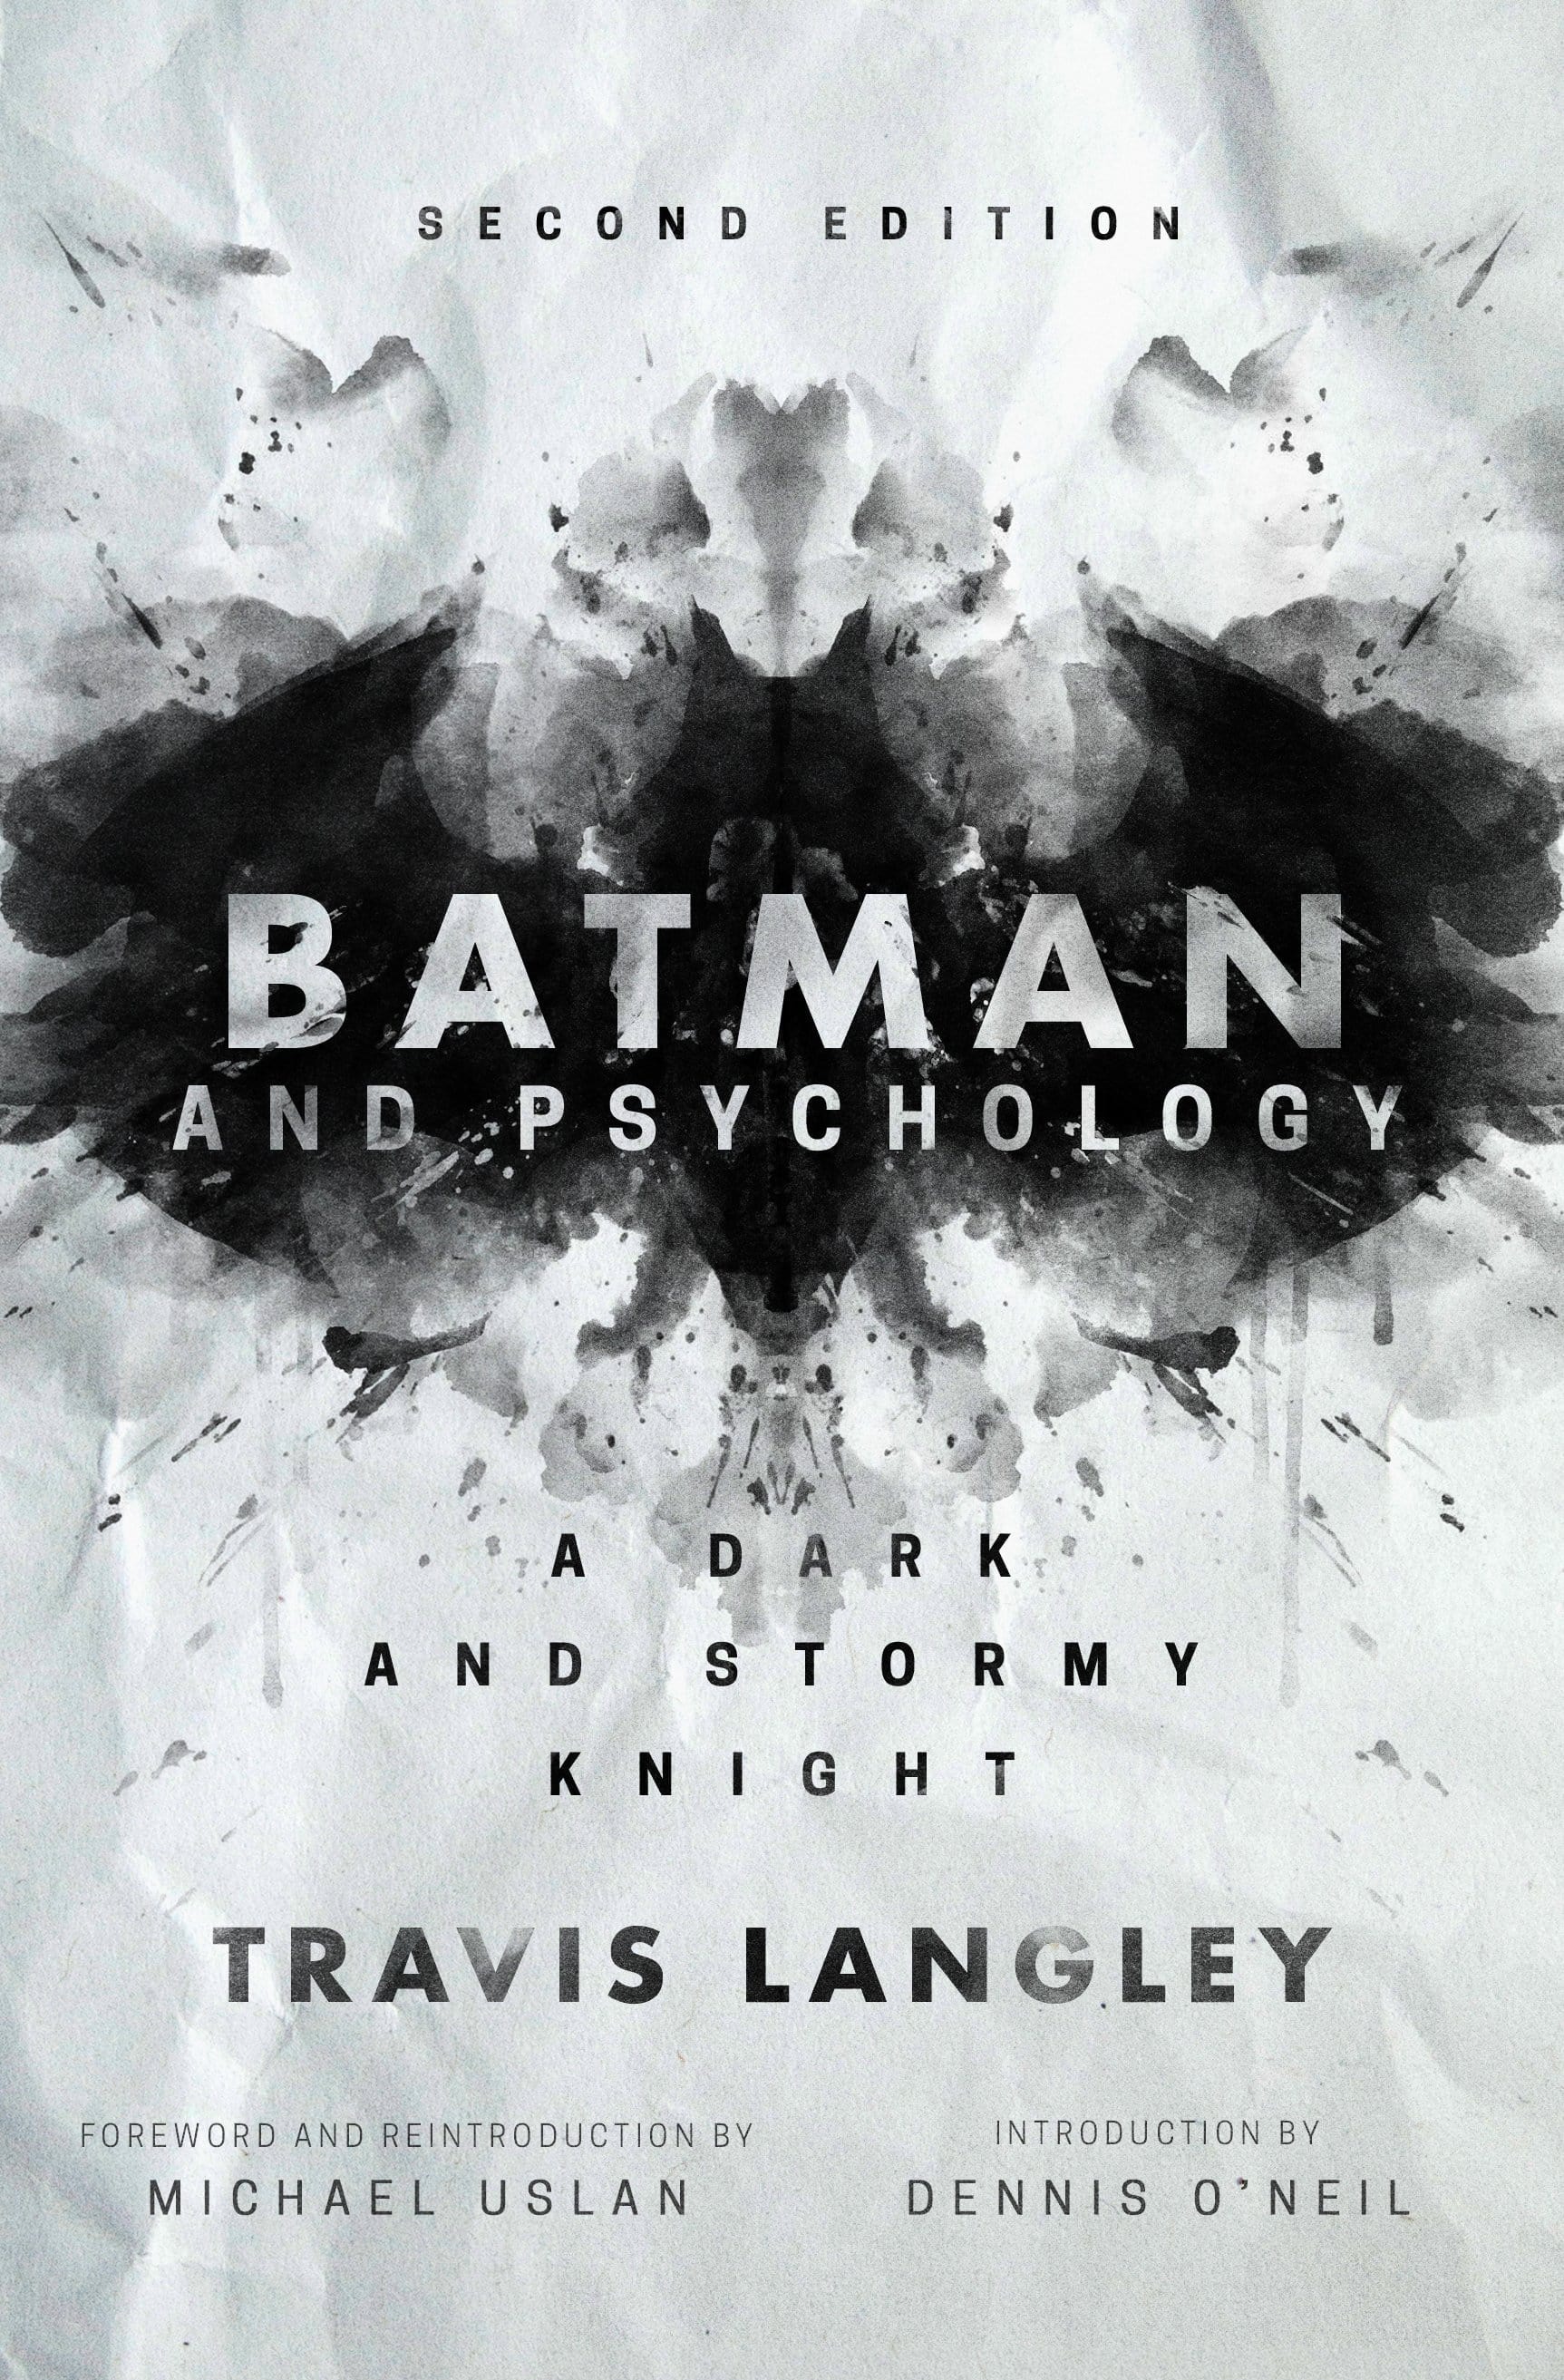 Book “Batman and Psychology” by Travis Langley — March 1, 2022